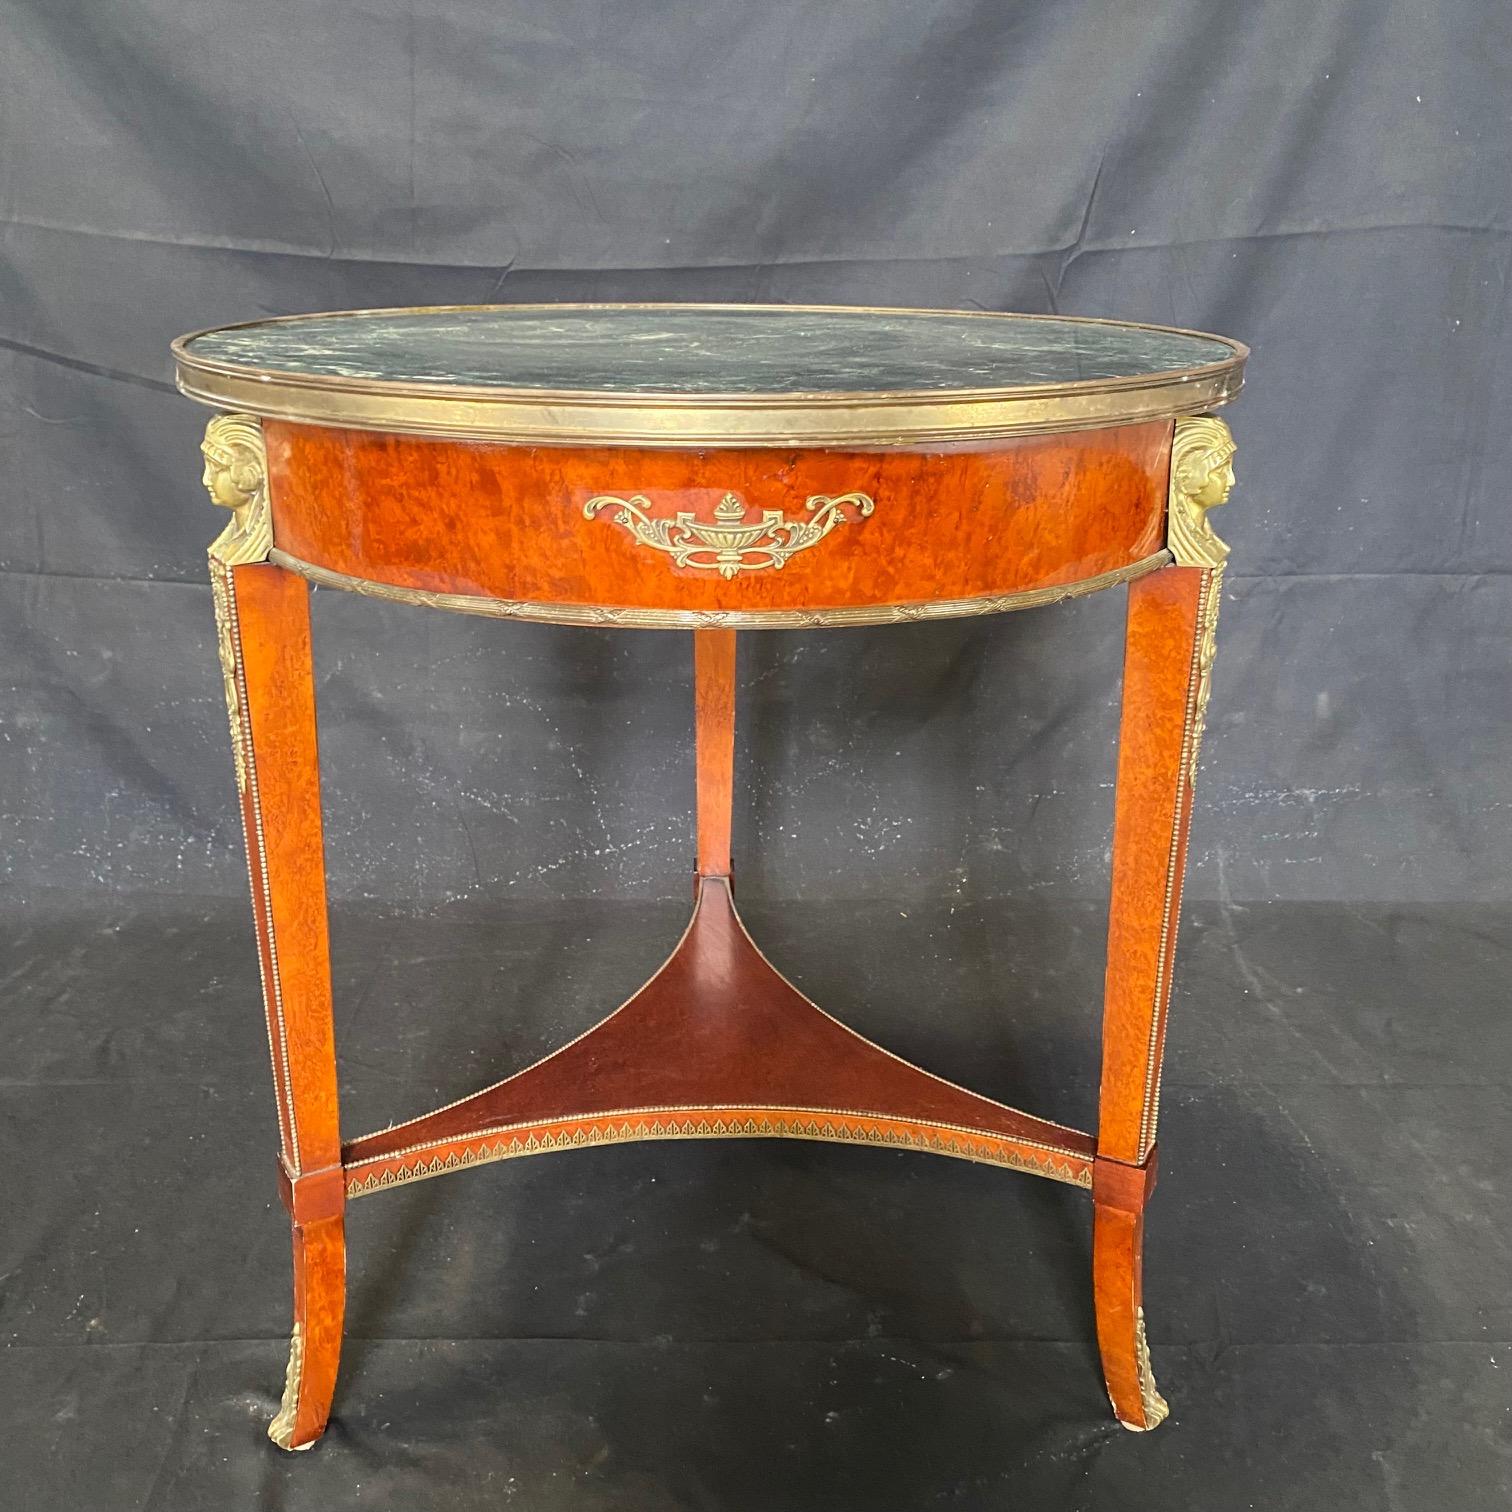 Lovely French Neoclassical style round side table with beautiful green marble top over tapering legs capped with bronze jabots.  Exceptional details include figural busts in bronze and beaded trim as well as fretwork on the stretchers. Two of the